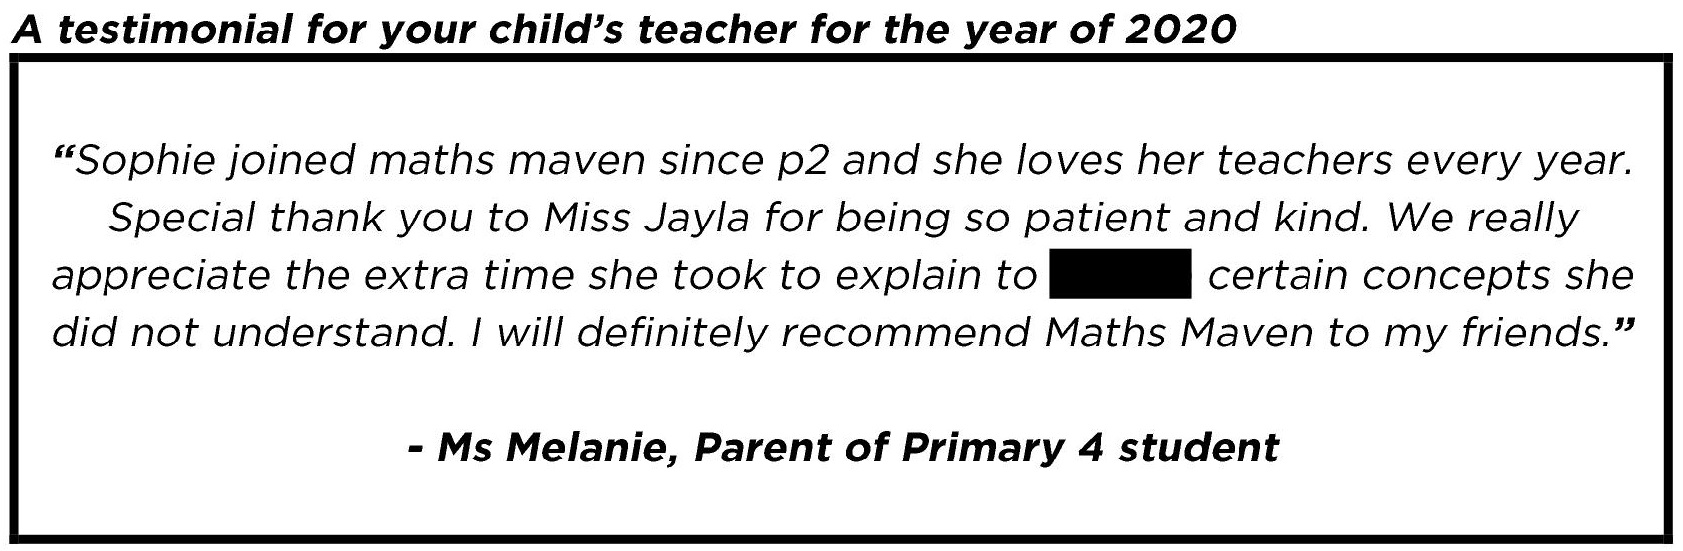 "...definitely recommend Maths Maven to my friends."